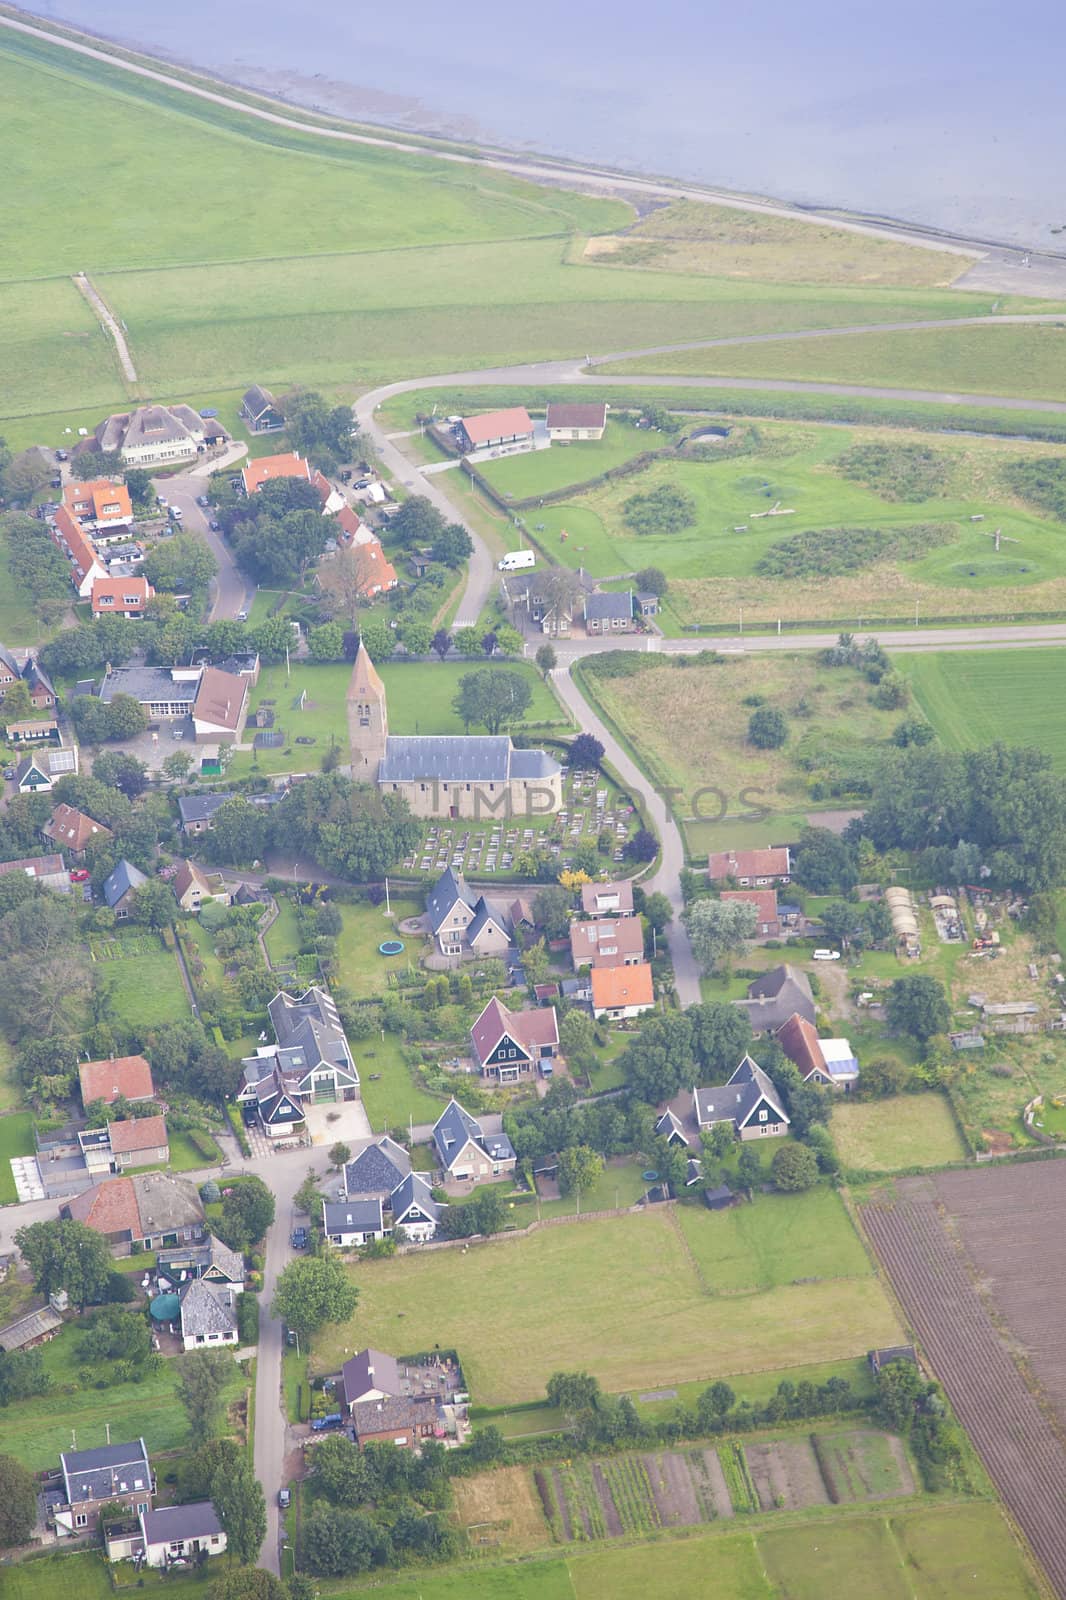 Little village from above in the Netherlands